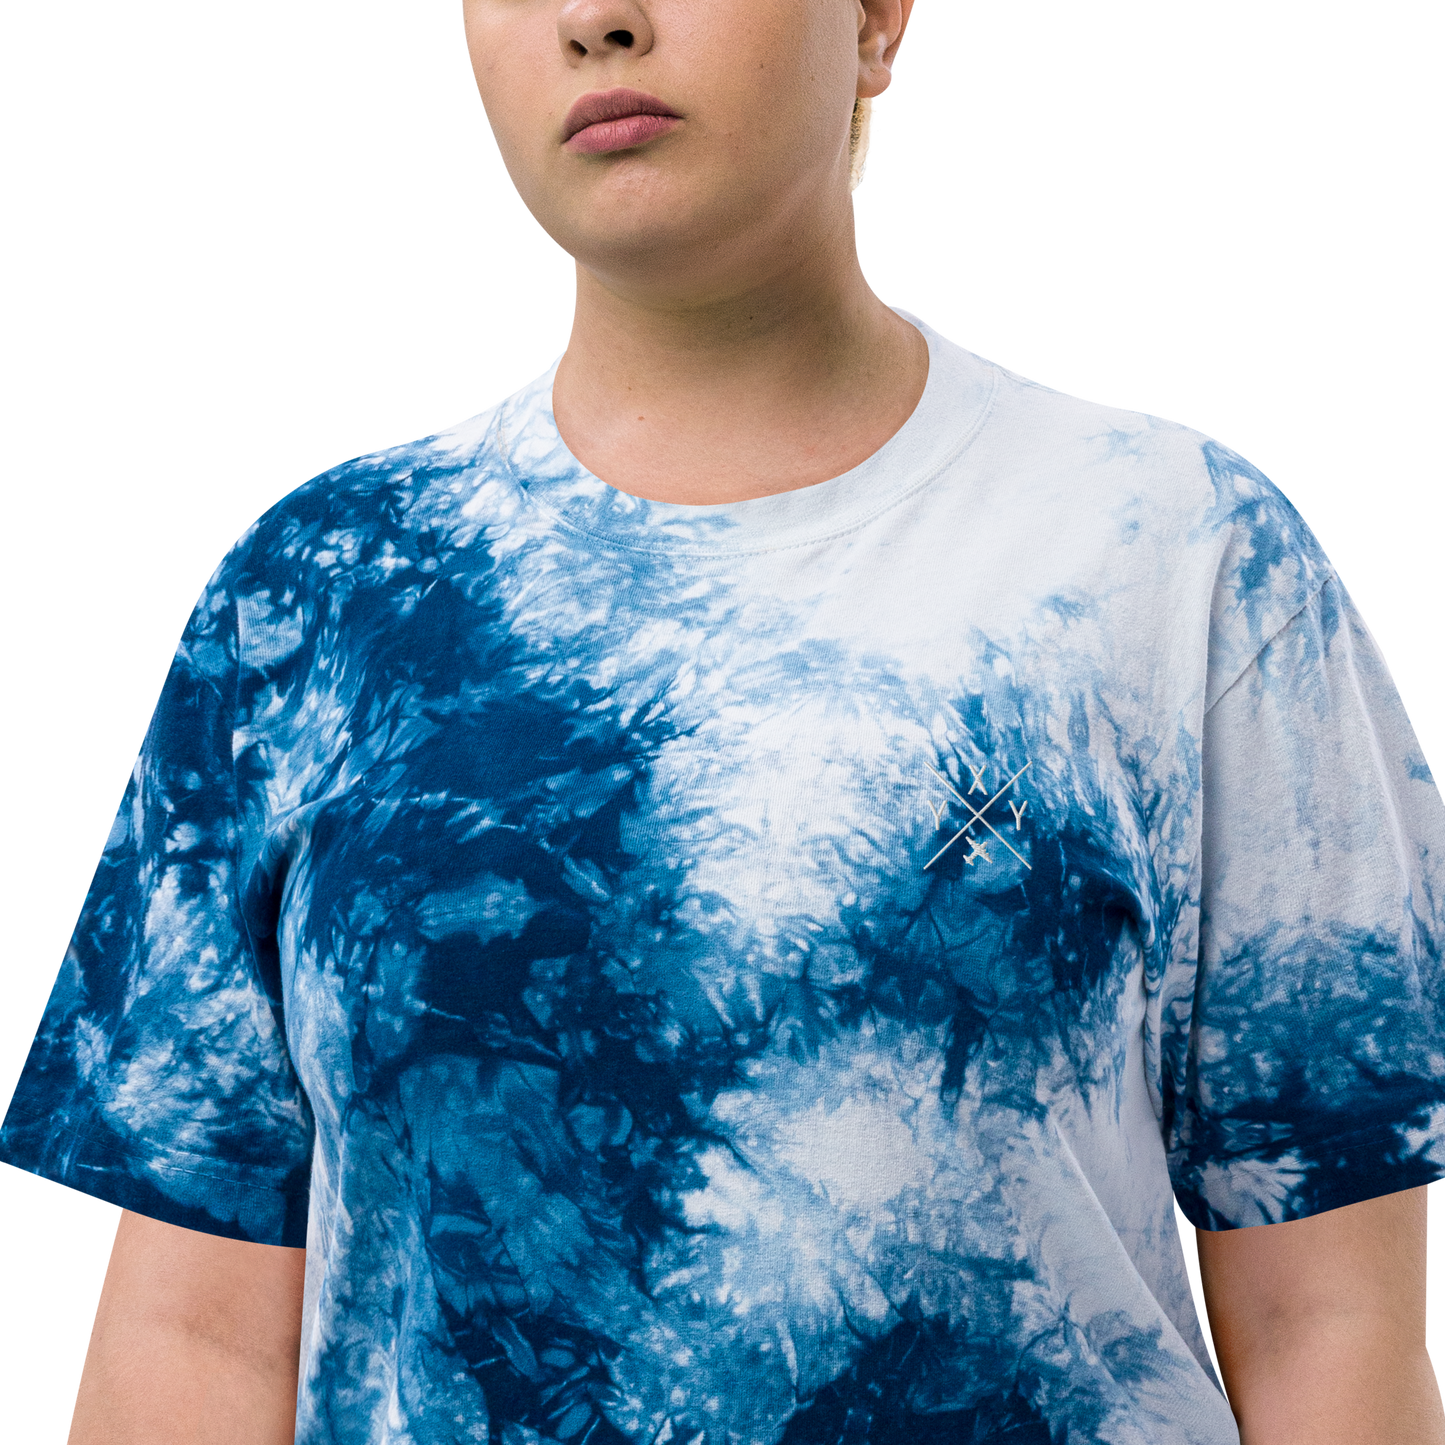 YHM Designs - YXY Whitehorse Oversized Tie-Dye T-Shirt - Crossed-X Design with Airport Code and Vintage Propliner - White Embroidery - Image 10